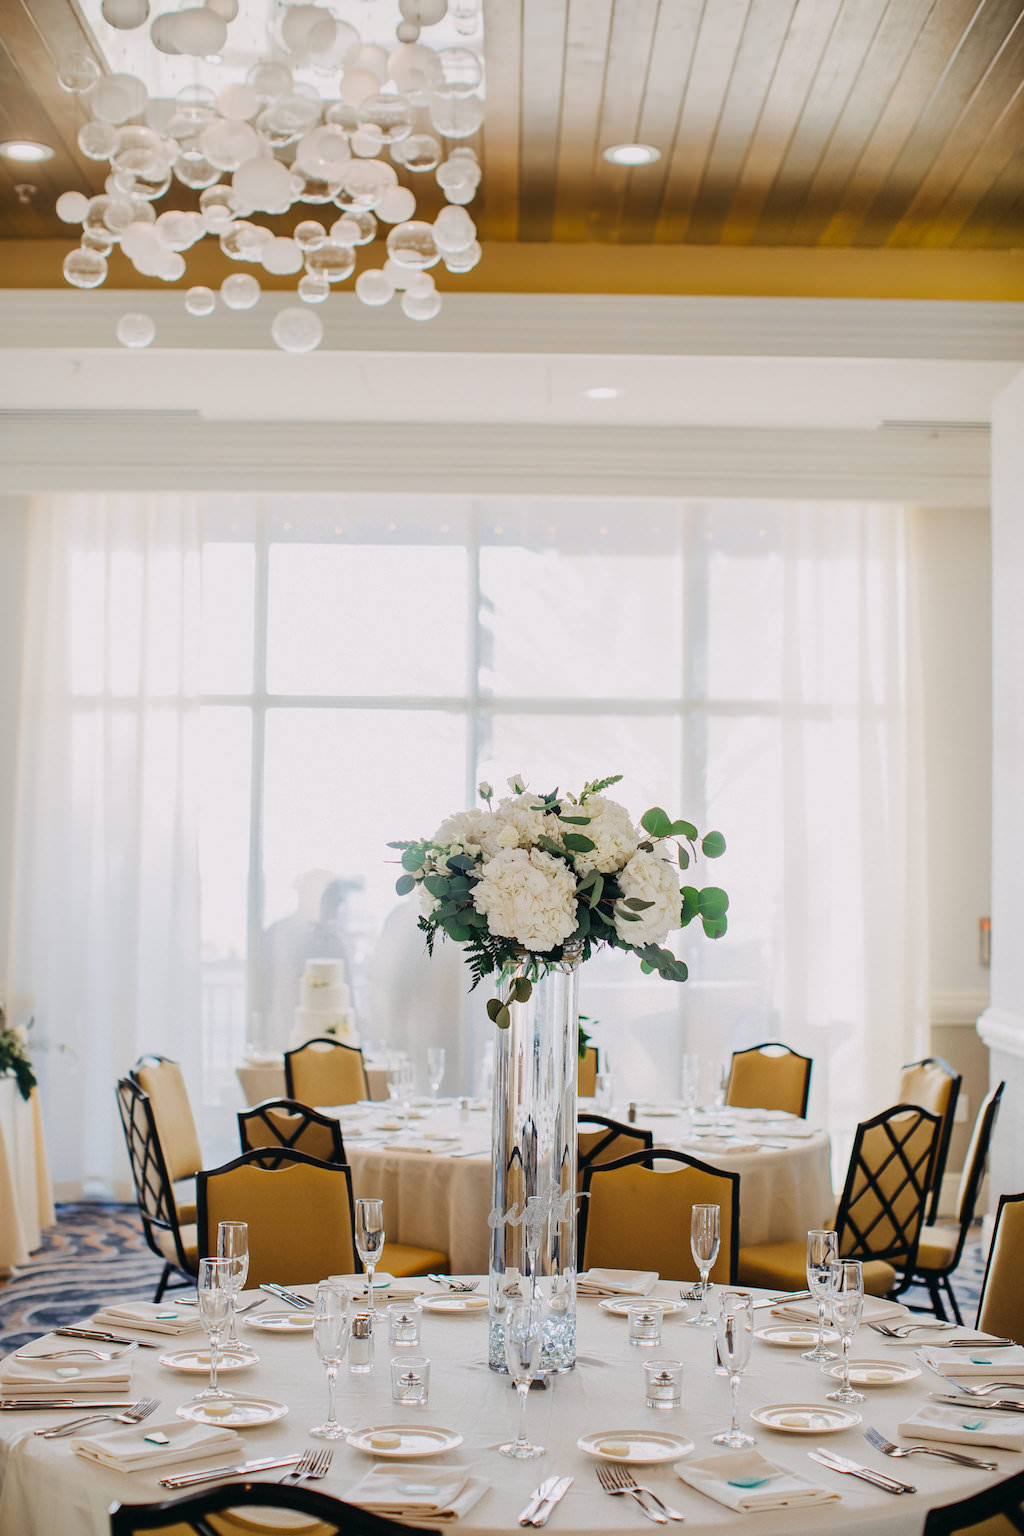 Modern Indoor Hotel Ballroom Wedding Reception with Ivory Rose and White Floral with Natural Greenery Extra Tall Centerpiece in Clear Glass Vase, with Silver Glitter Table Number | Waterfront Hotel Wedding Venue Hyatt Regency Clearwater Beach